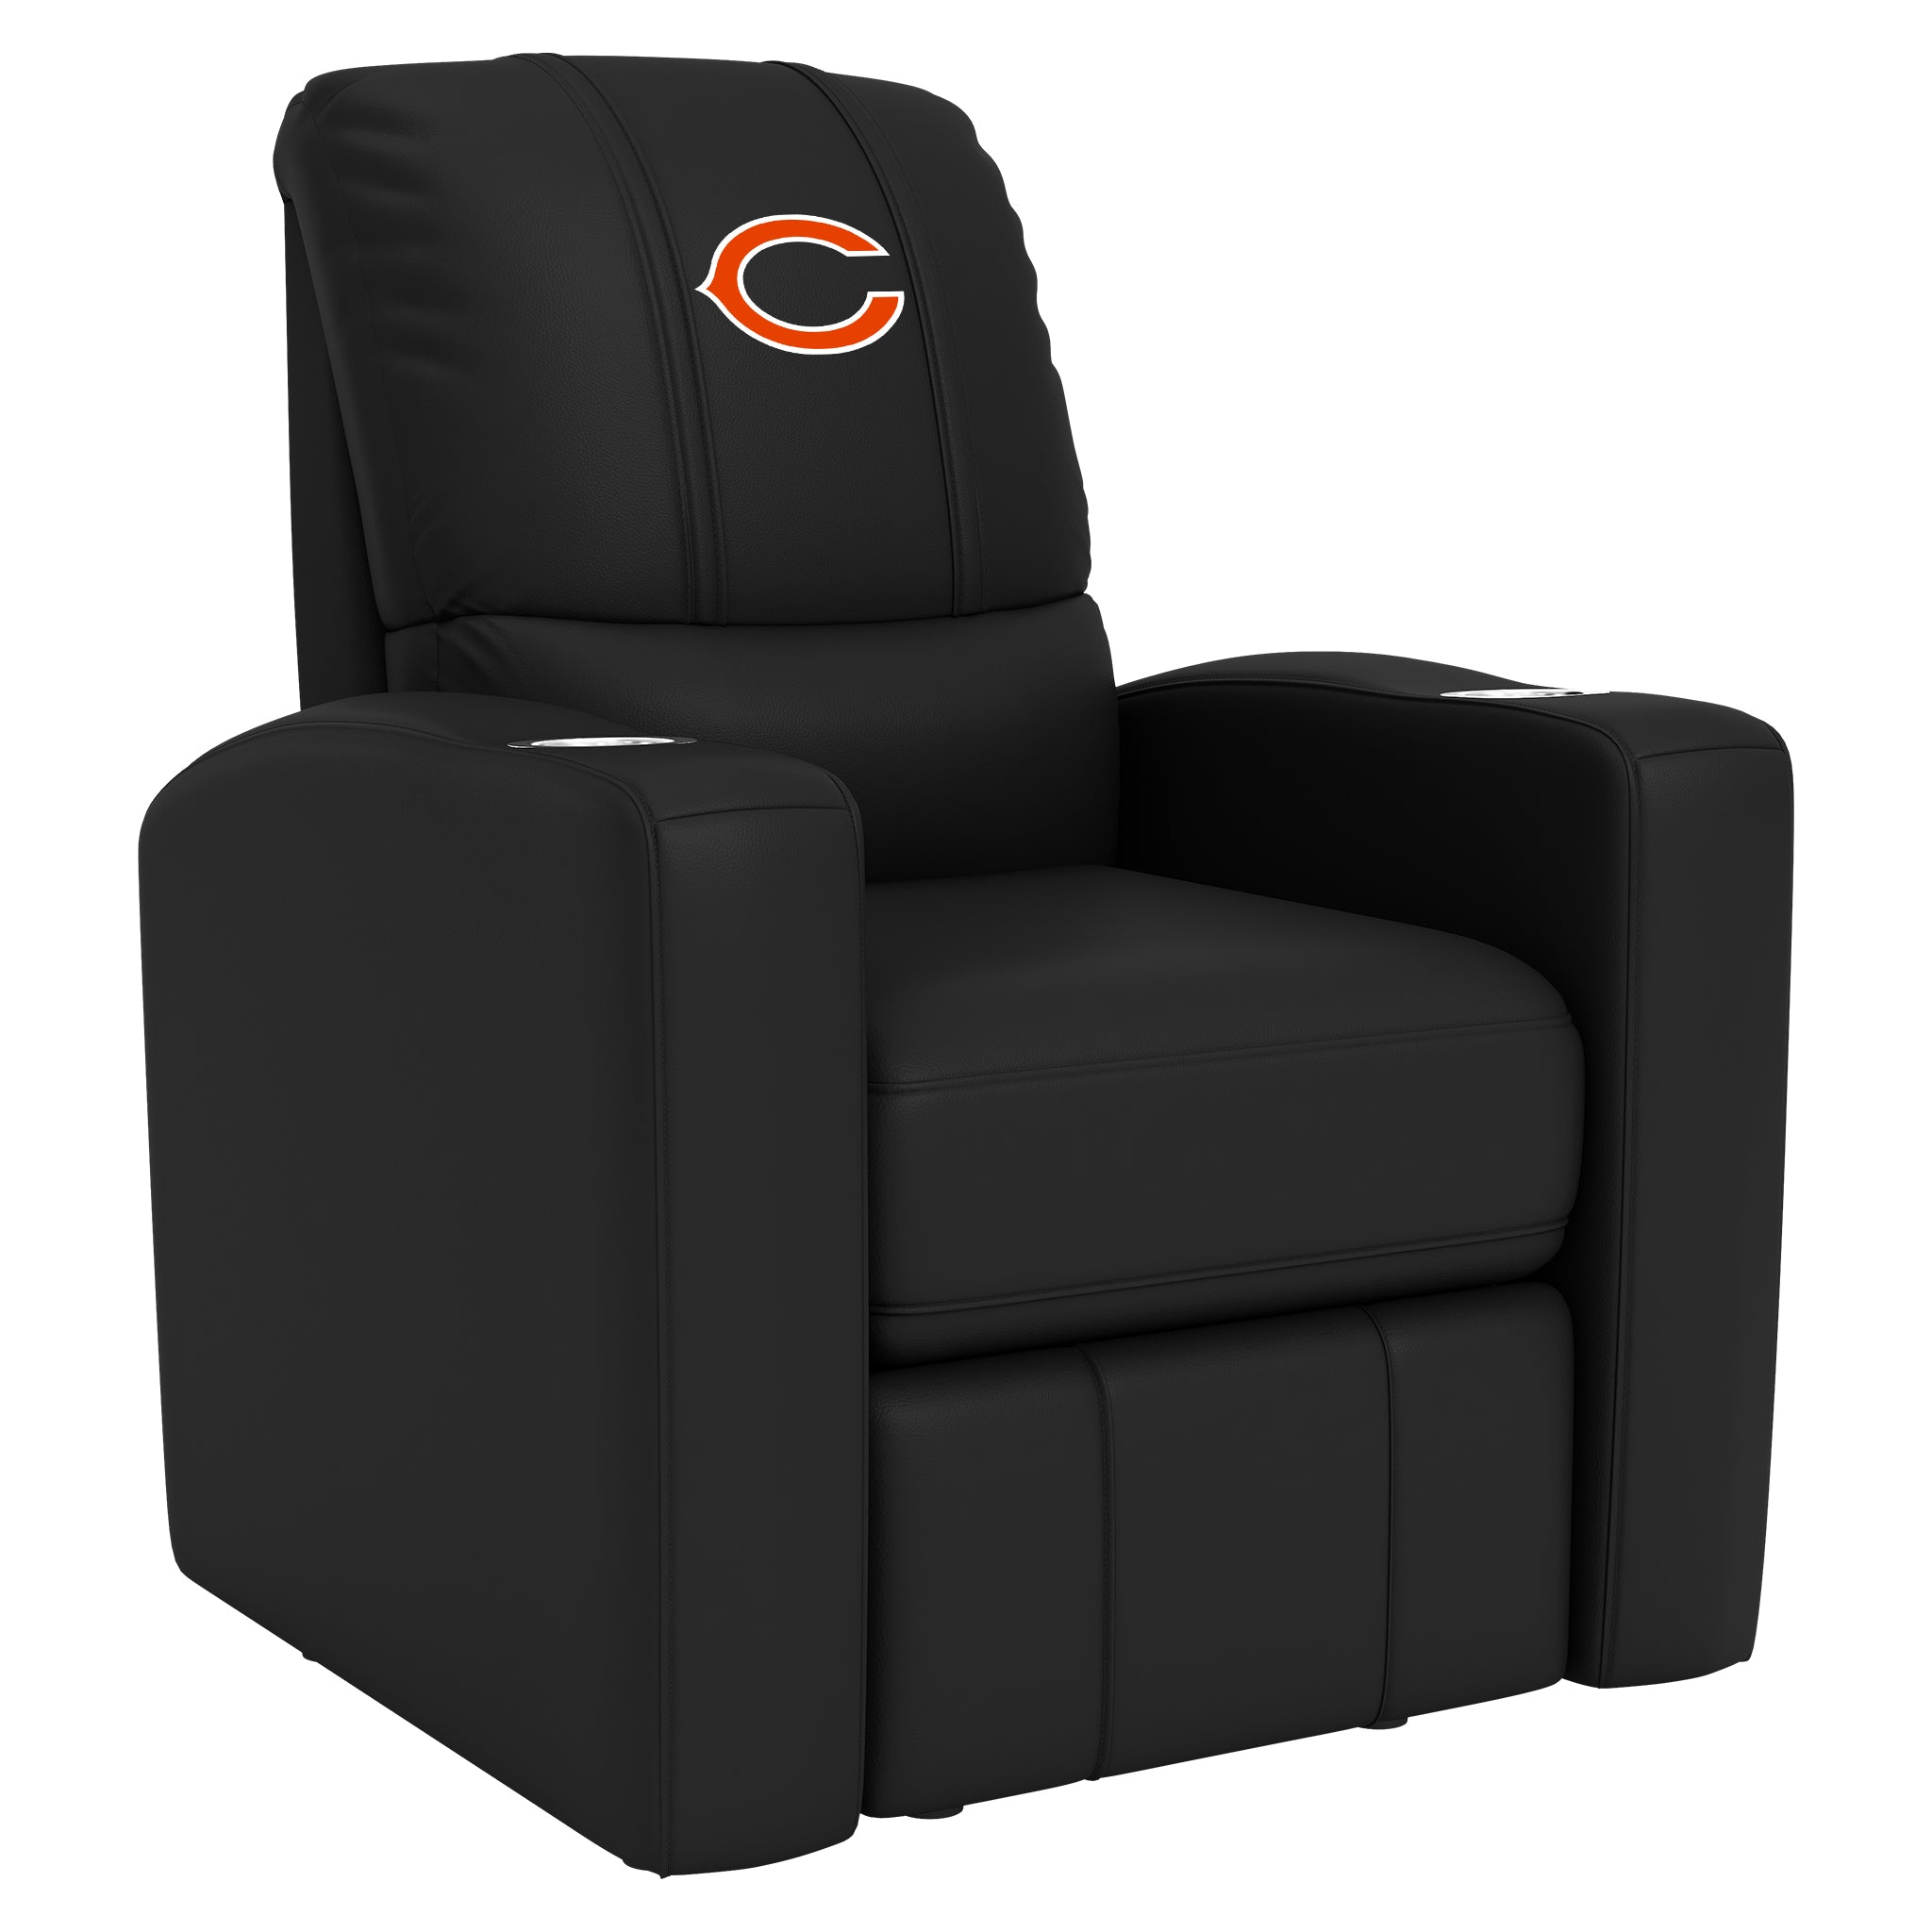 Chicago Bears Stealth Recliner Manual